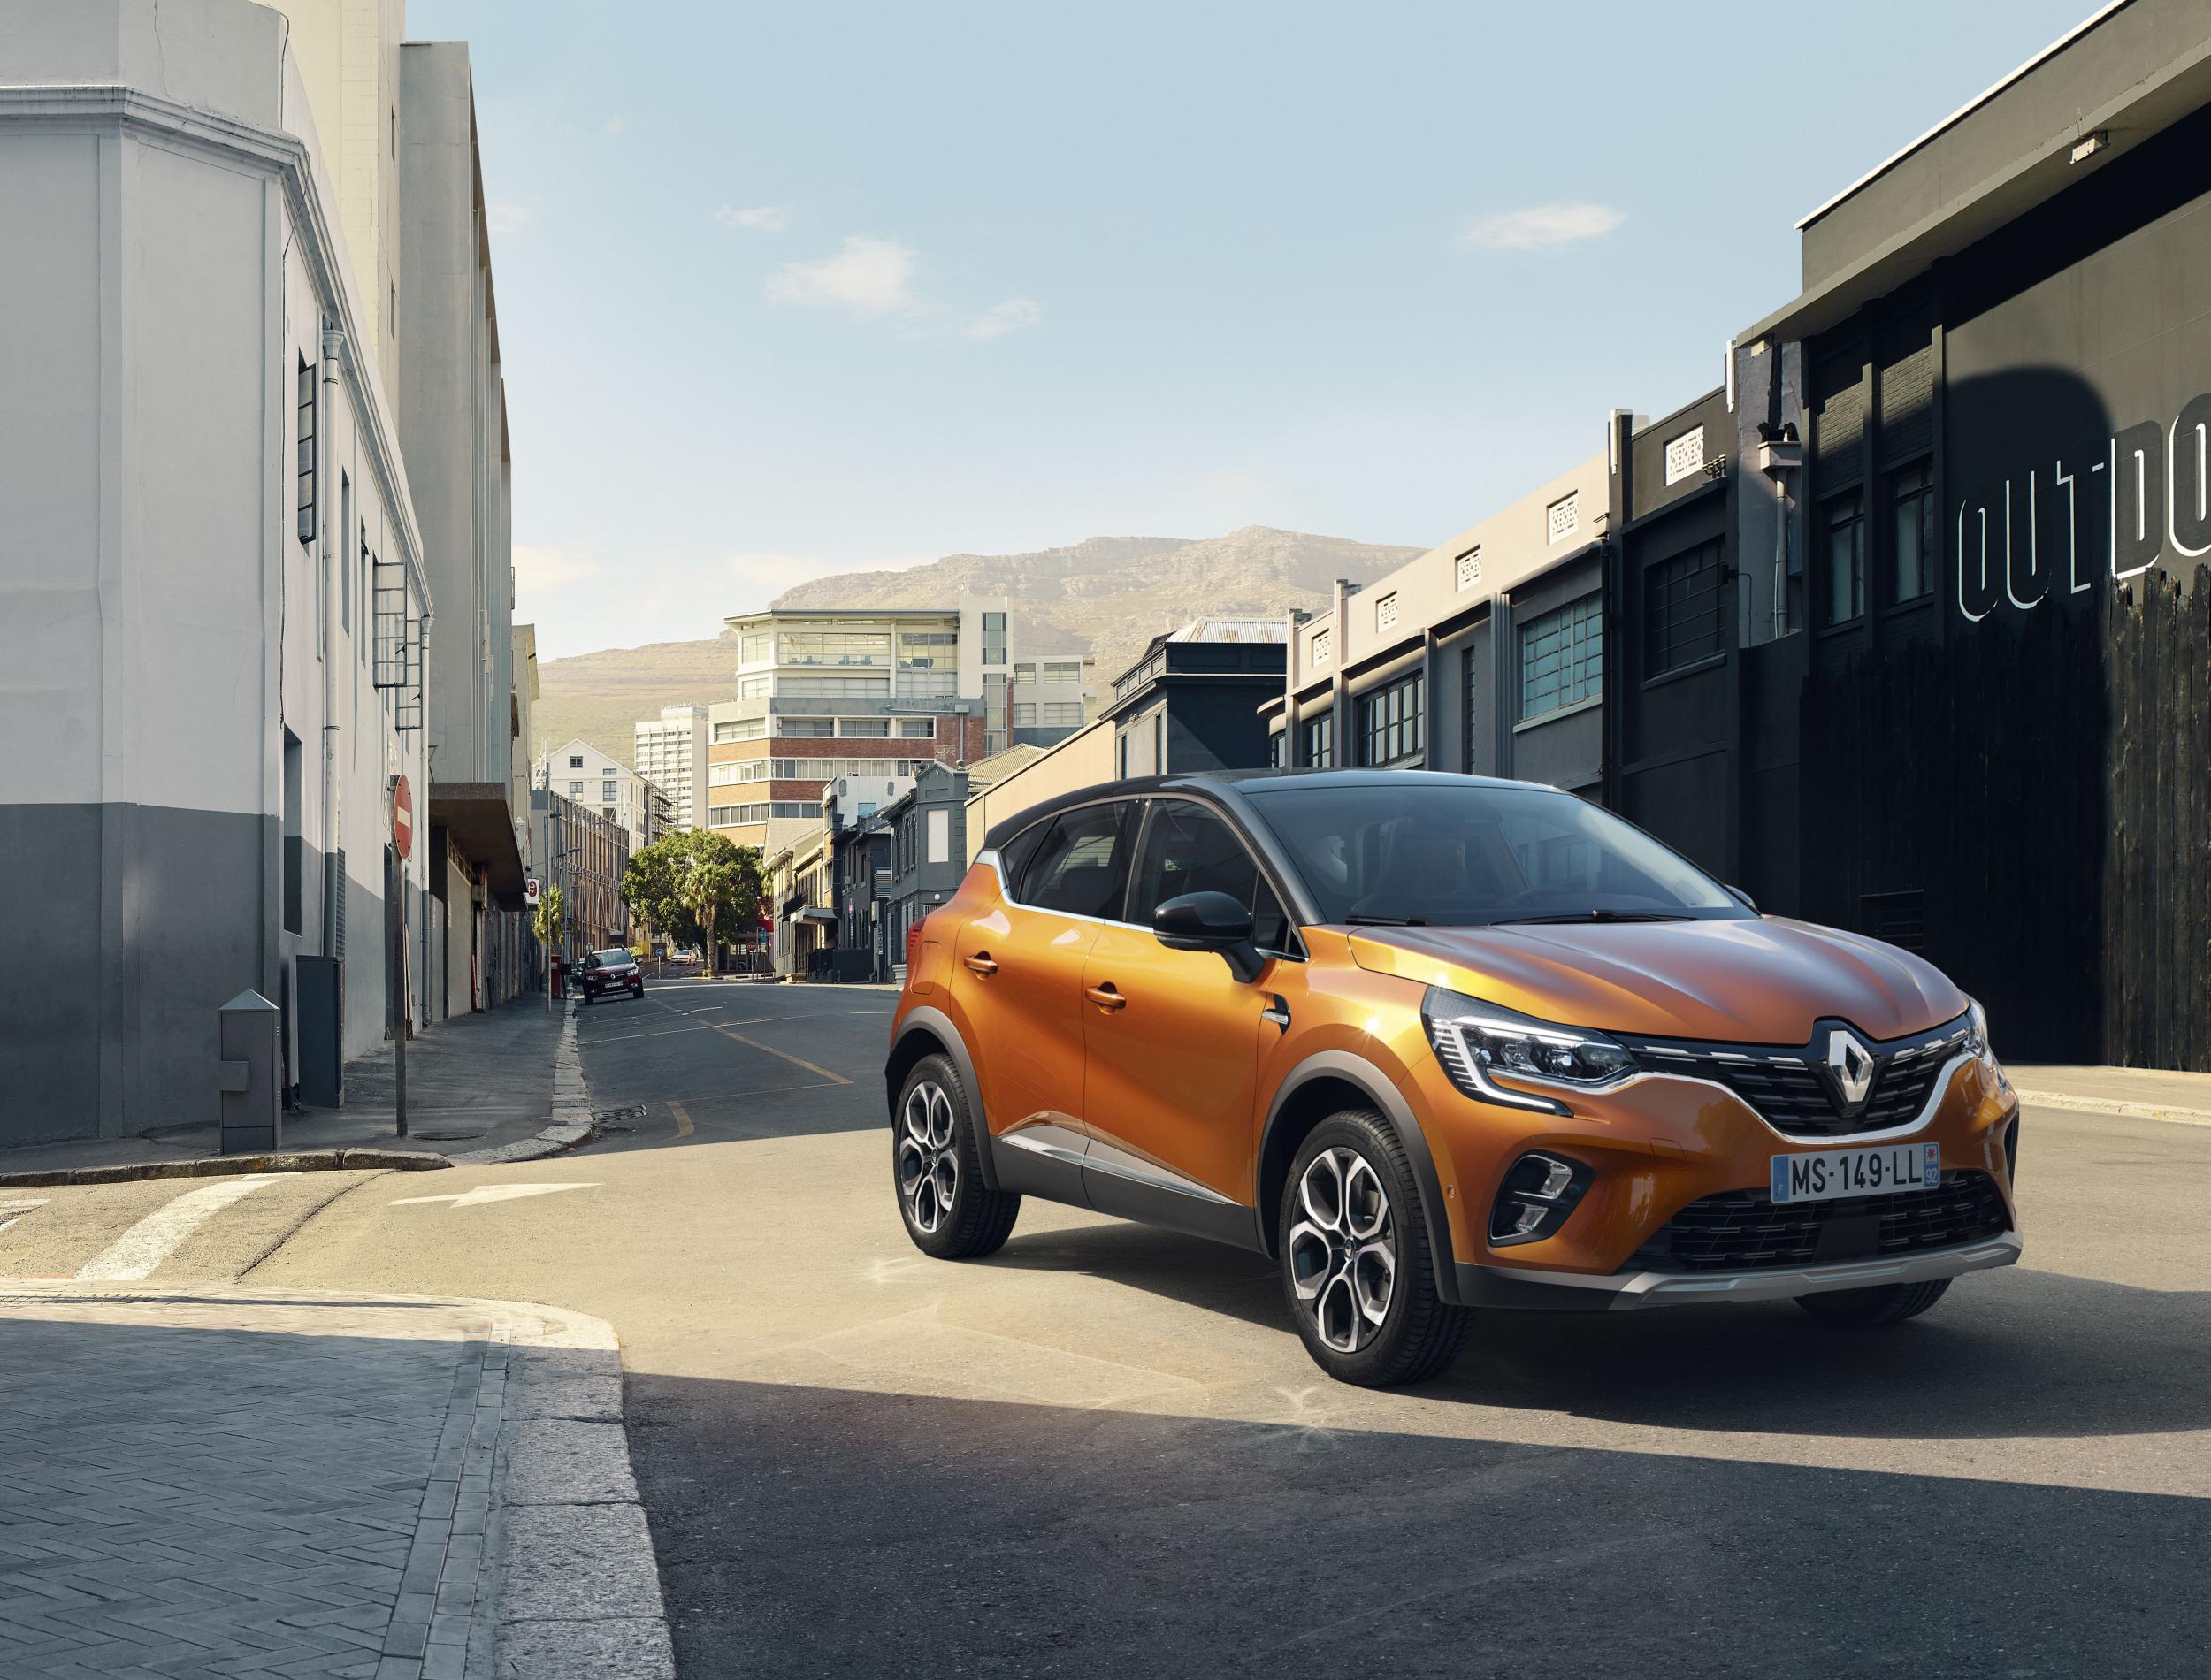 This is the brand new Renault Captur. No, seriously